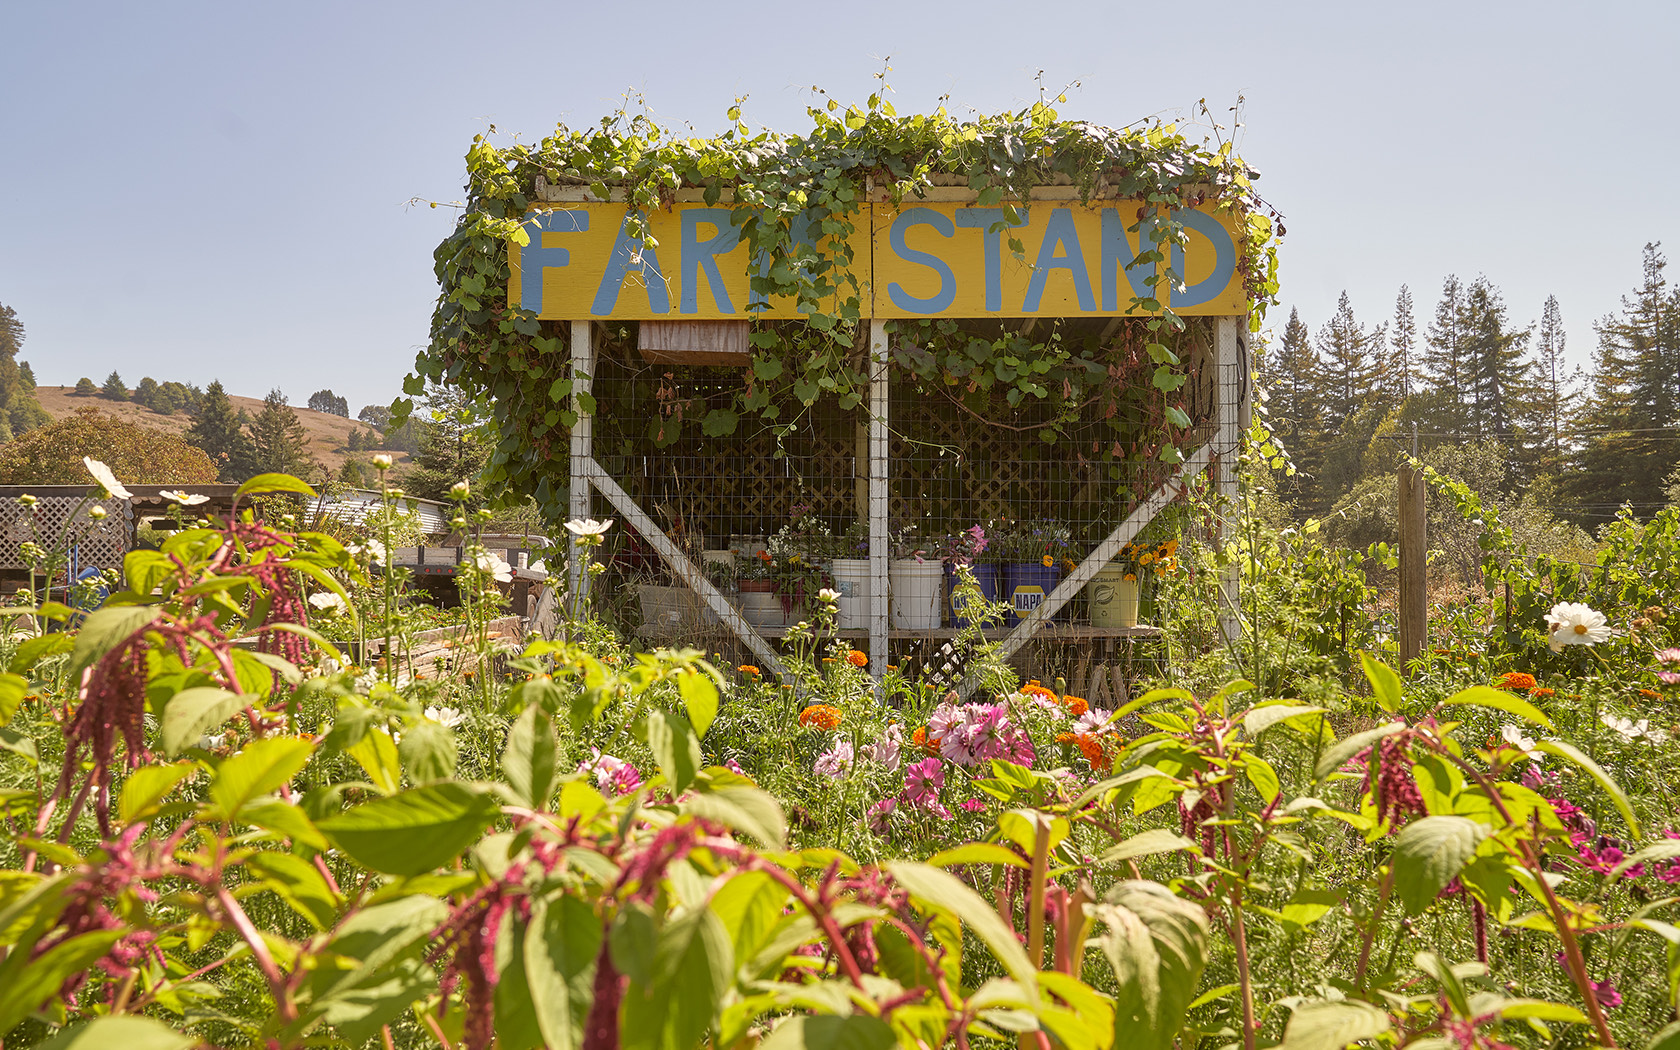 View of a local farmstand surrounded by plants 